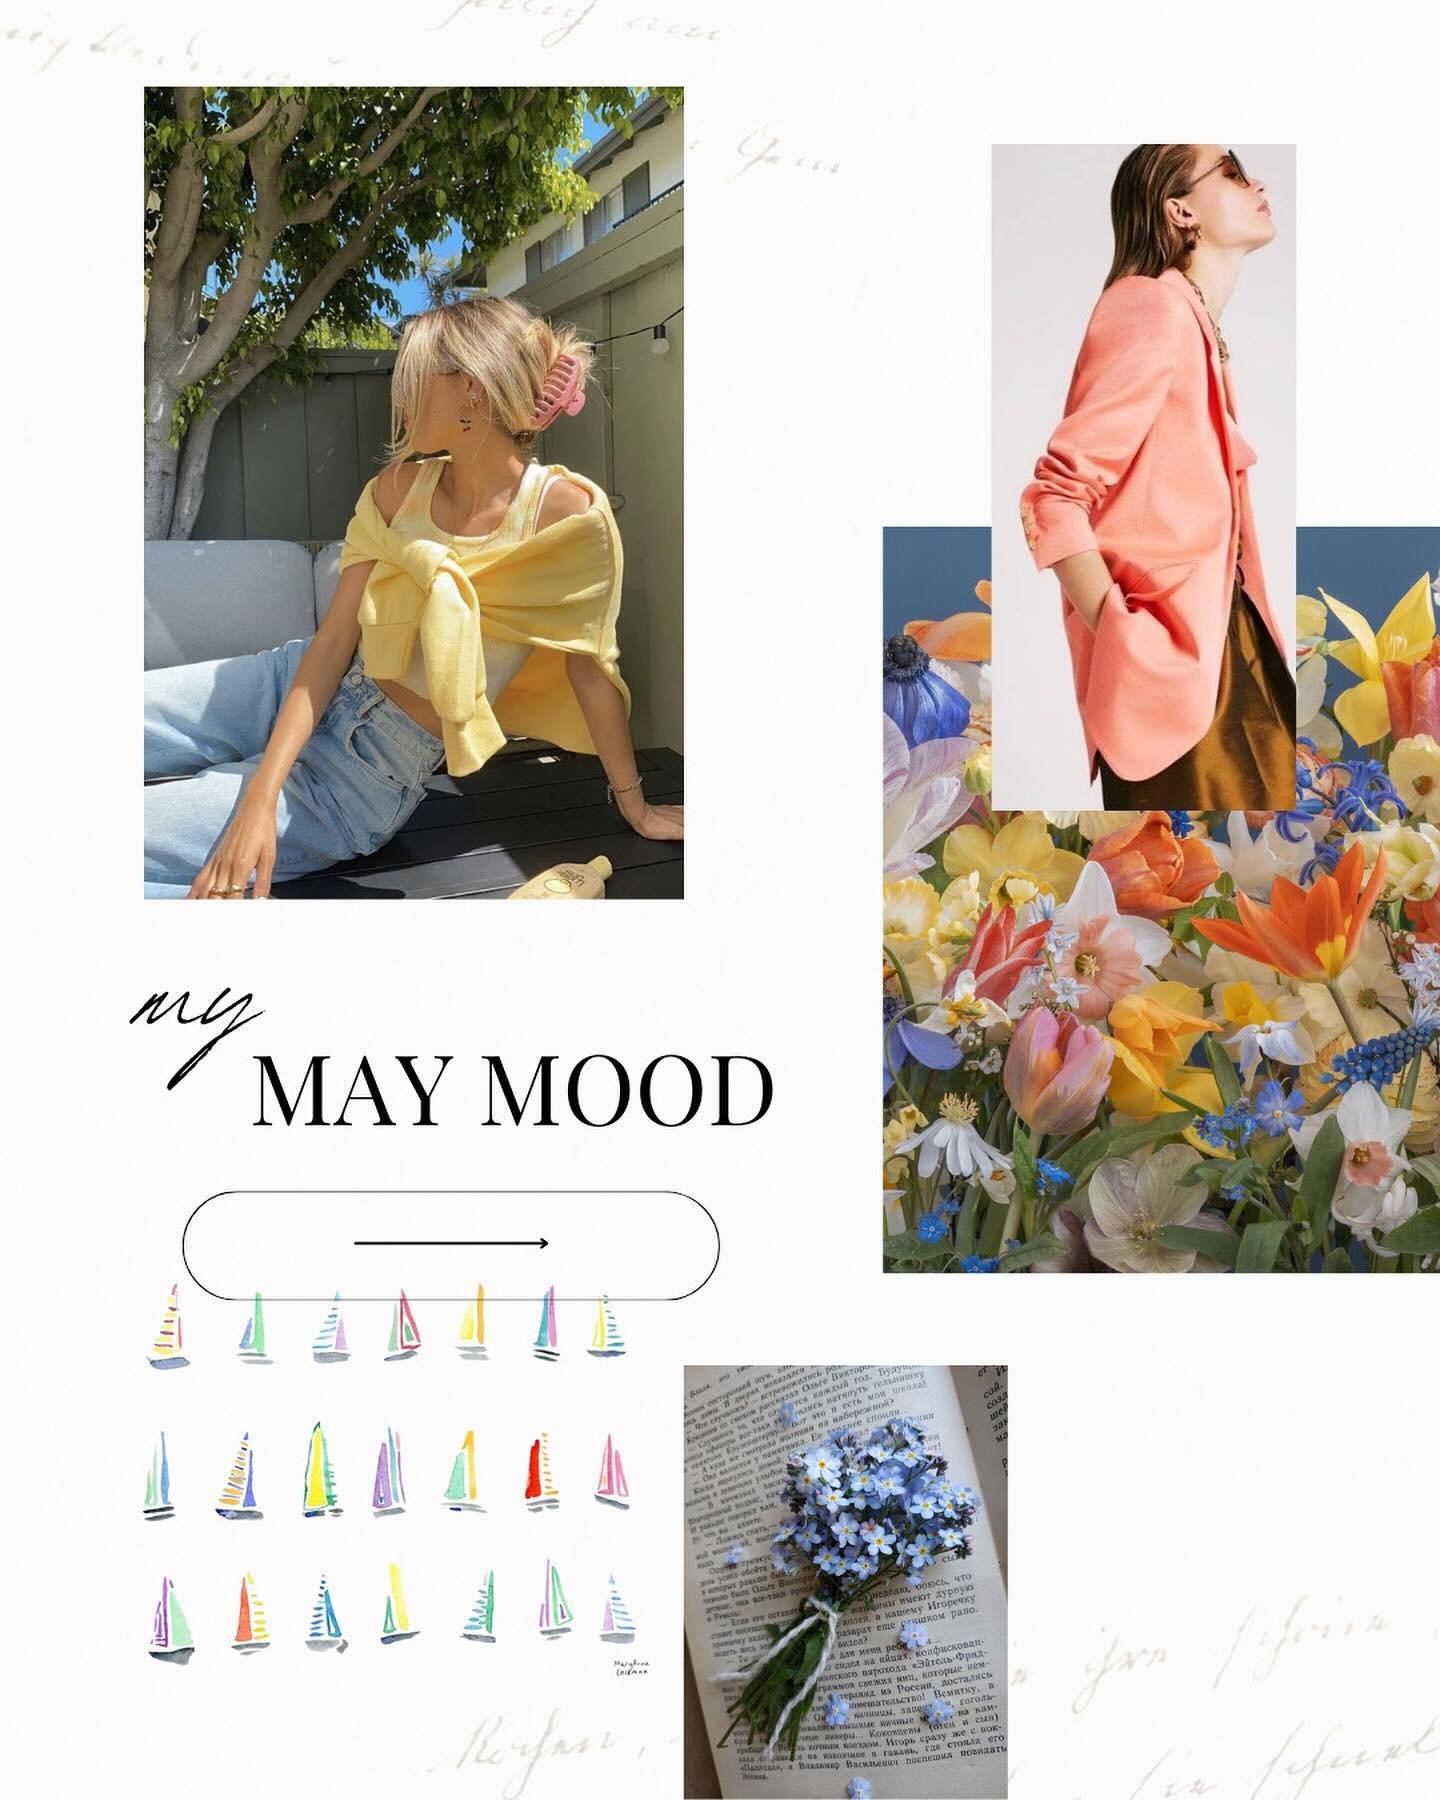 🌸 Sailing into spring with a bouquet of blooms and a dash of nautical charm! ⛵️✨ 🌼
⠀⠀⠀⠀⠀⠀⠀⠀⠀
My #MayMoodboard is a blend of delicate florals (hello lily of the valley!) and the allure of colorful sailboats dancing on the waves. Pale yellow, peachy 